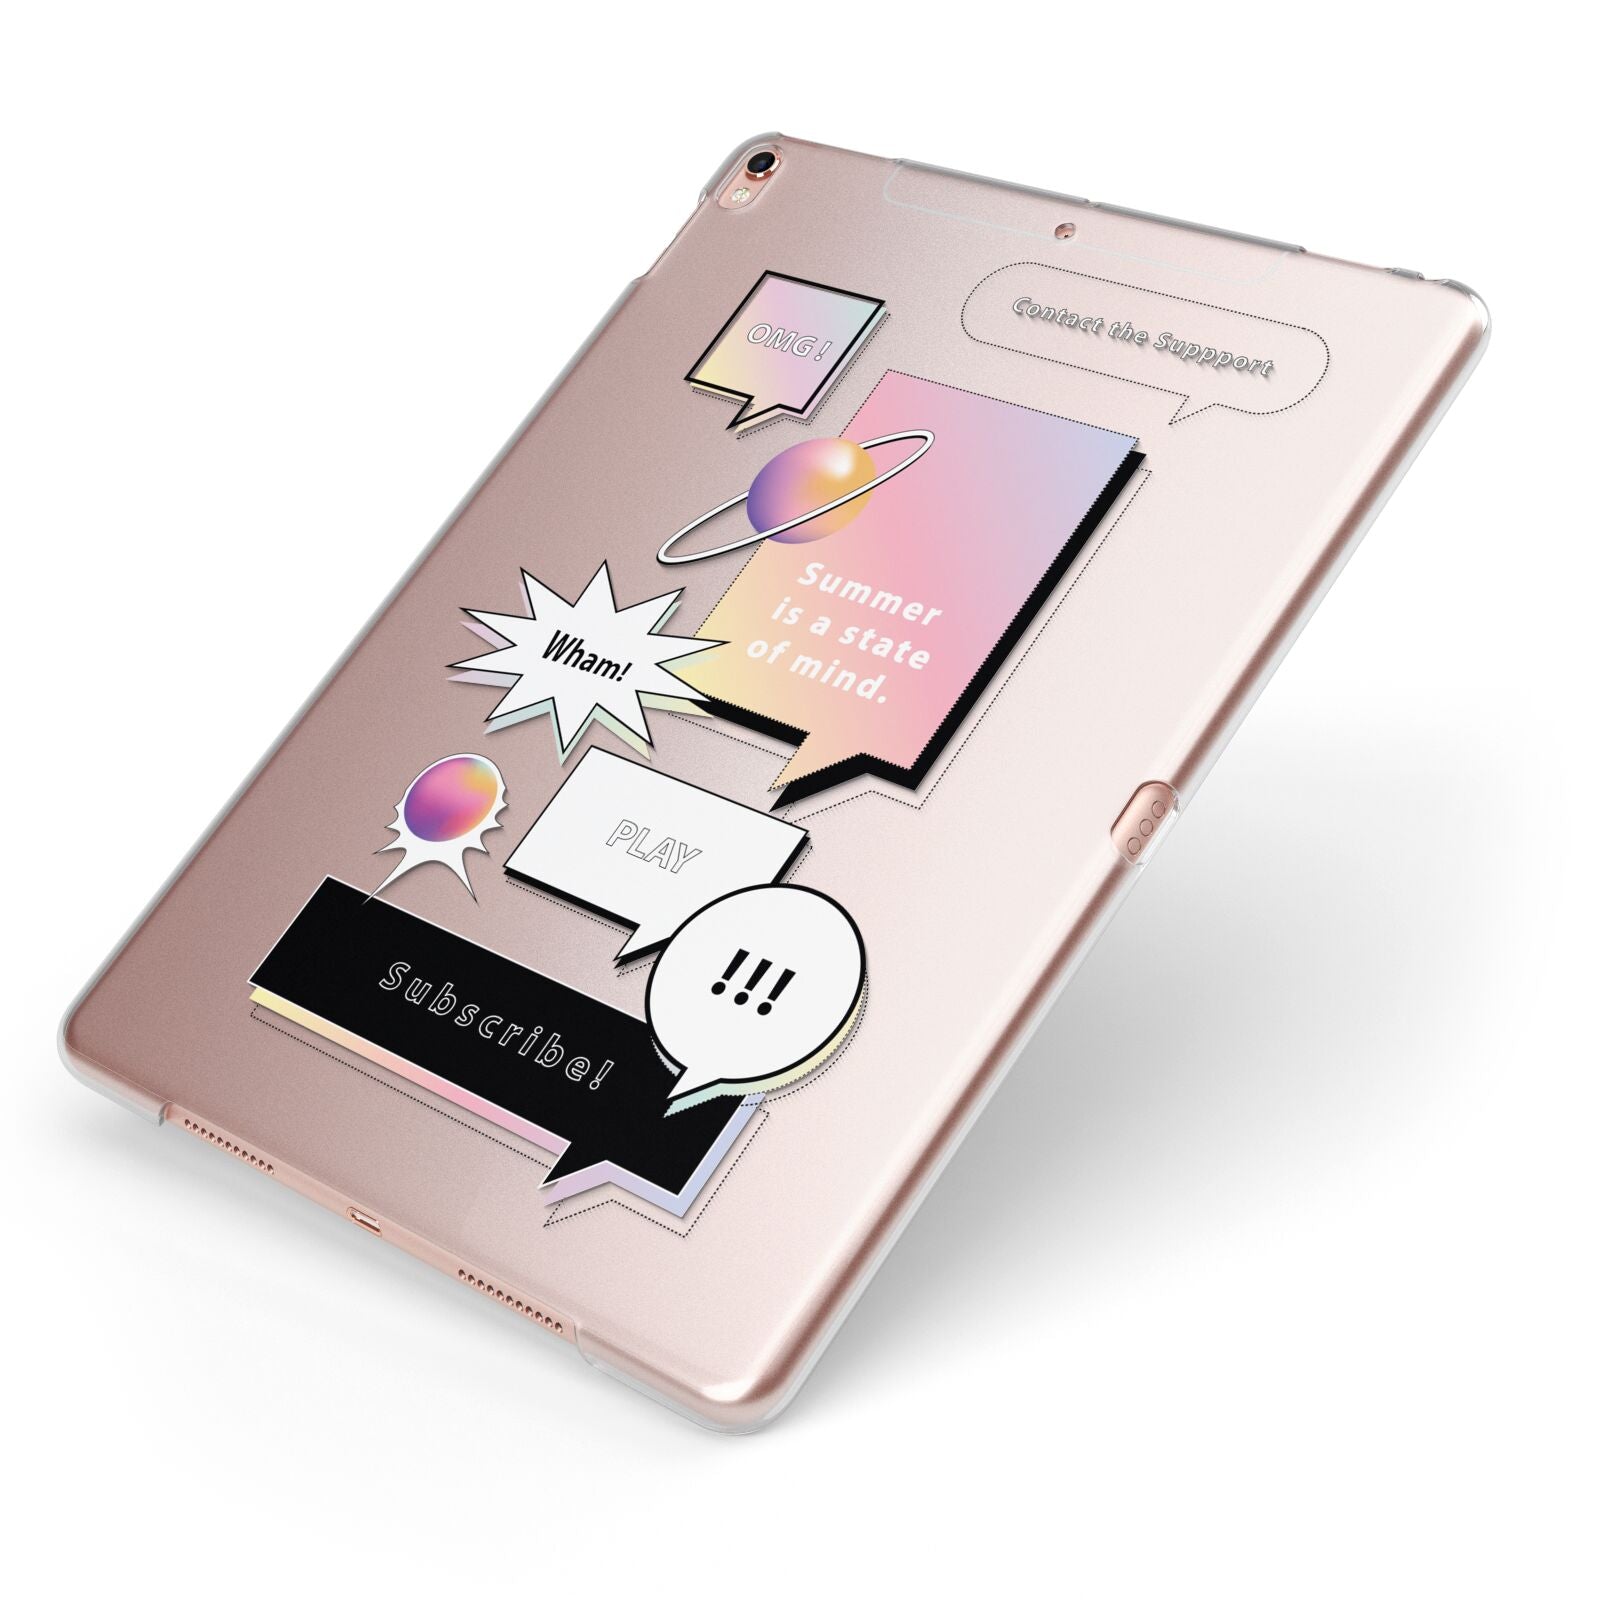 Summer Is A State Of Mind Apple iPad Case on Rose Gold iPad Side View